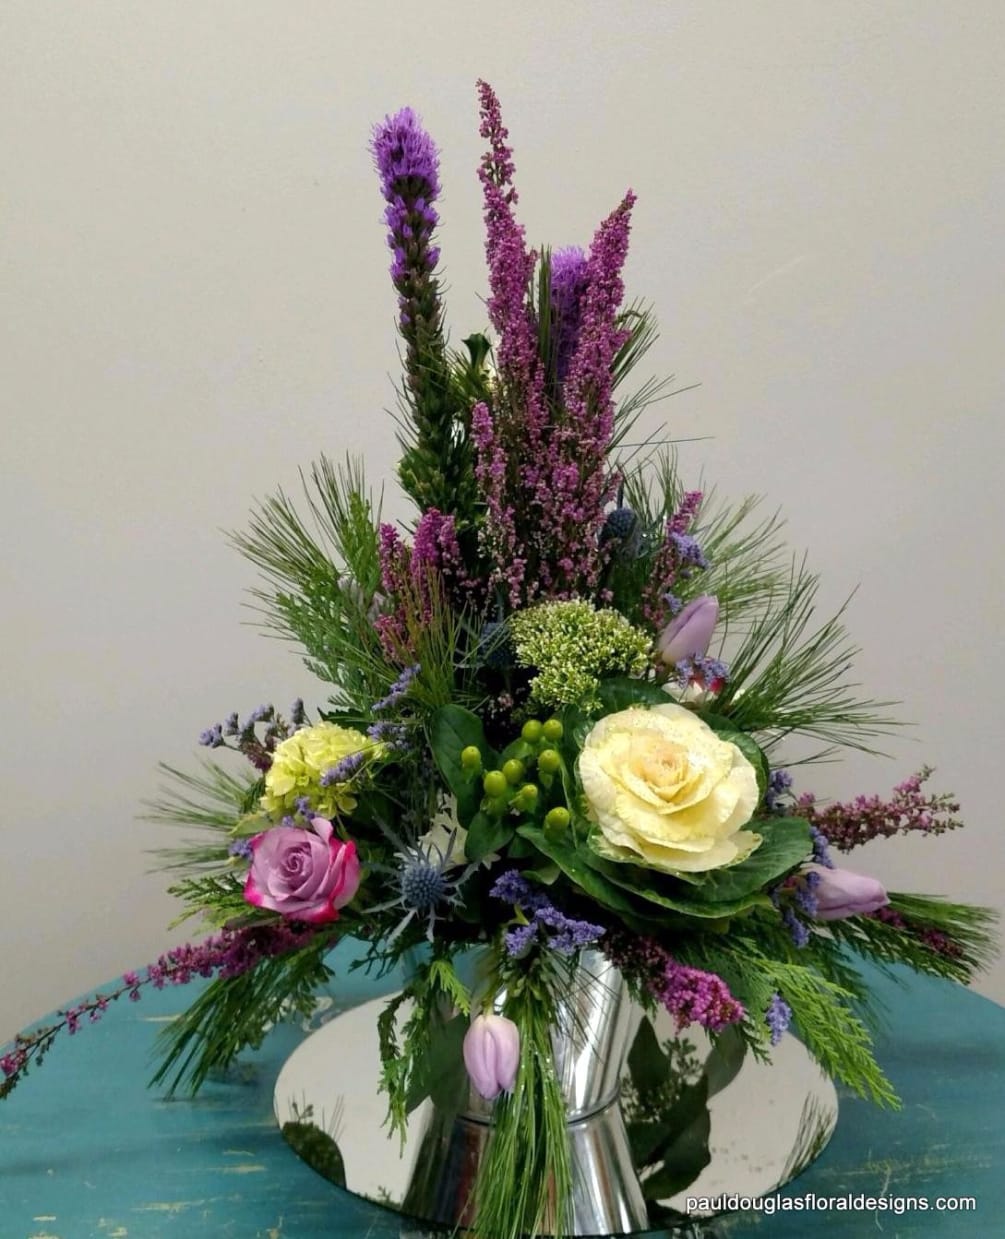 Different shades of purples with a mix of premium blooms.